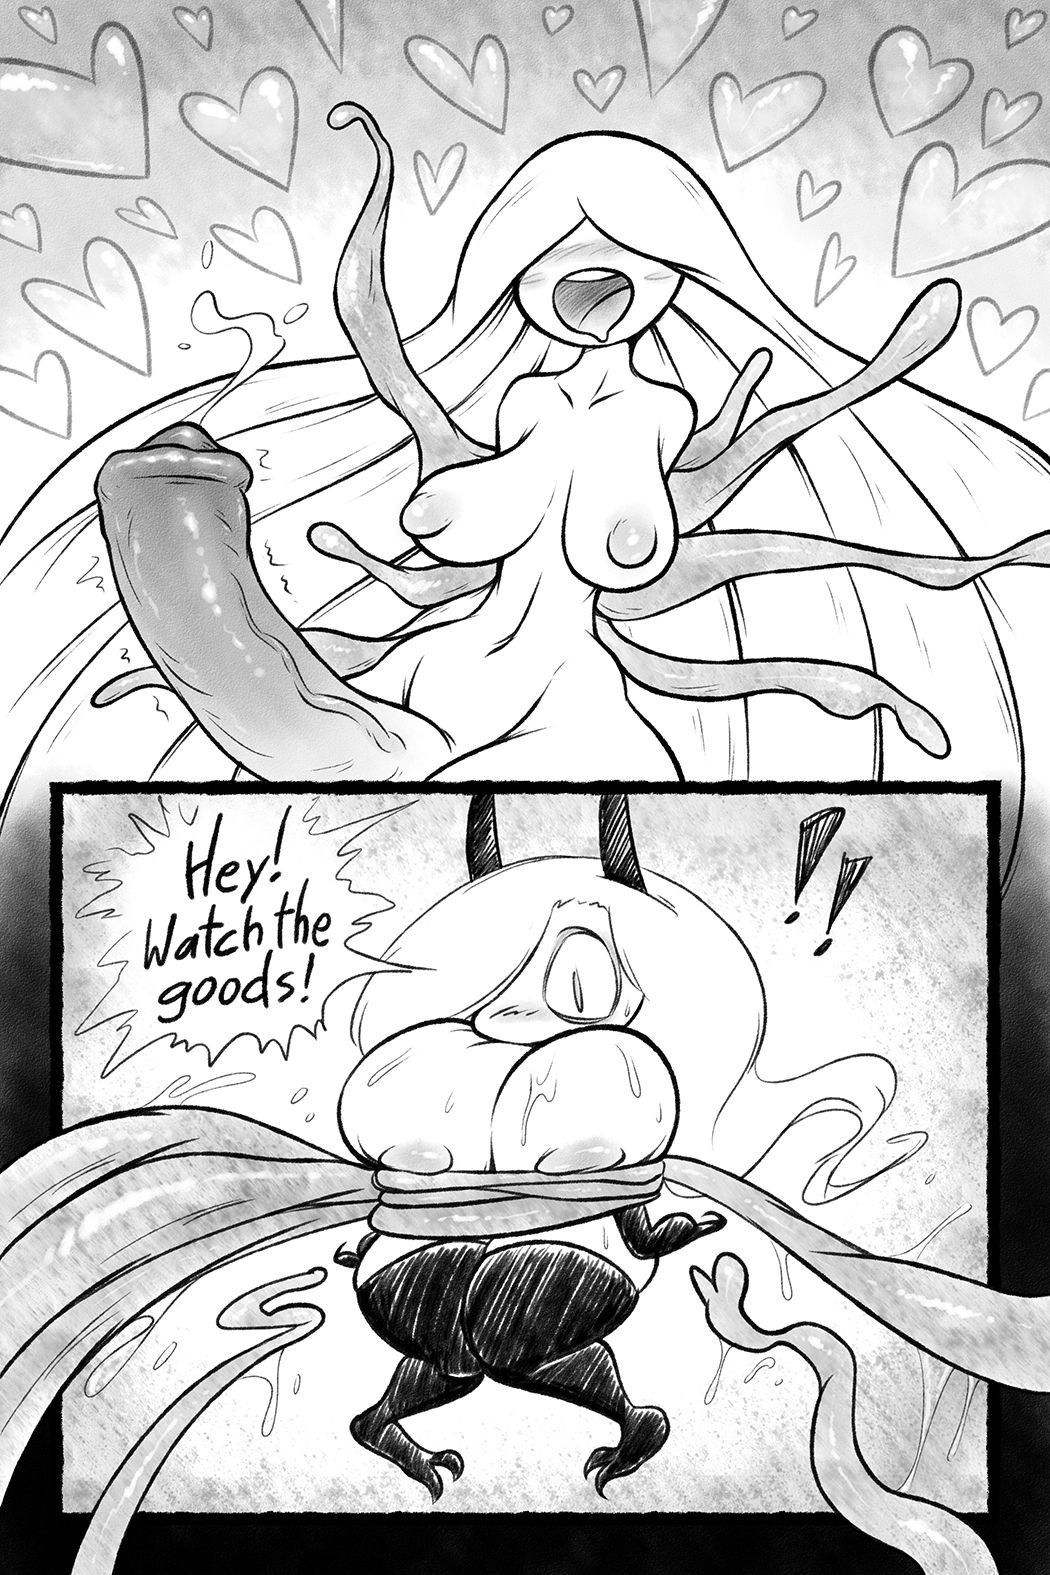 [CheezyWEAPON] Horny Hell Hoes Origins 73